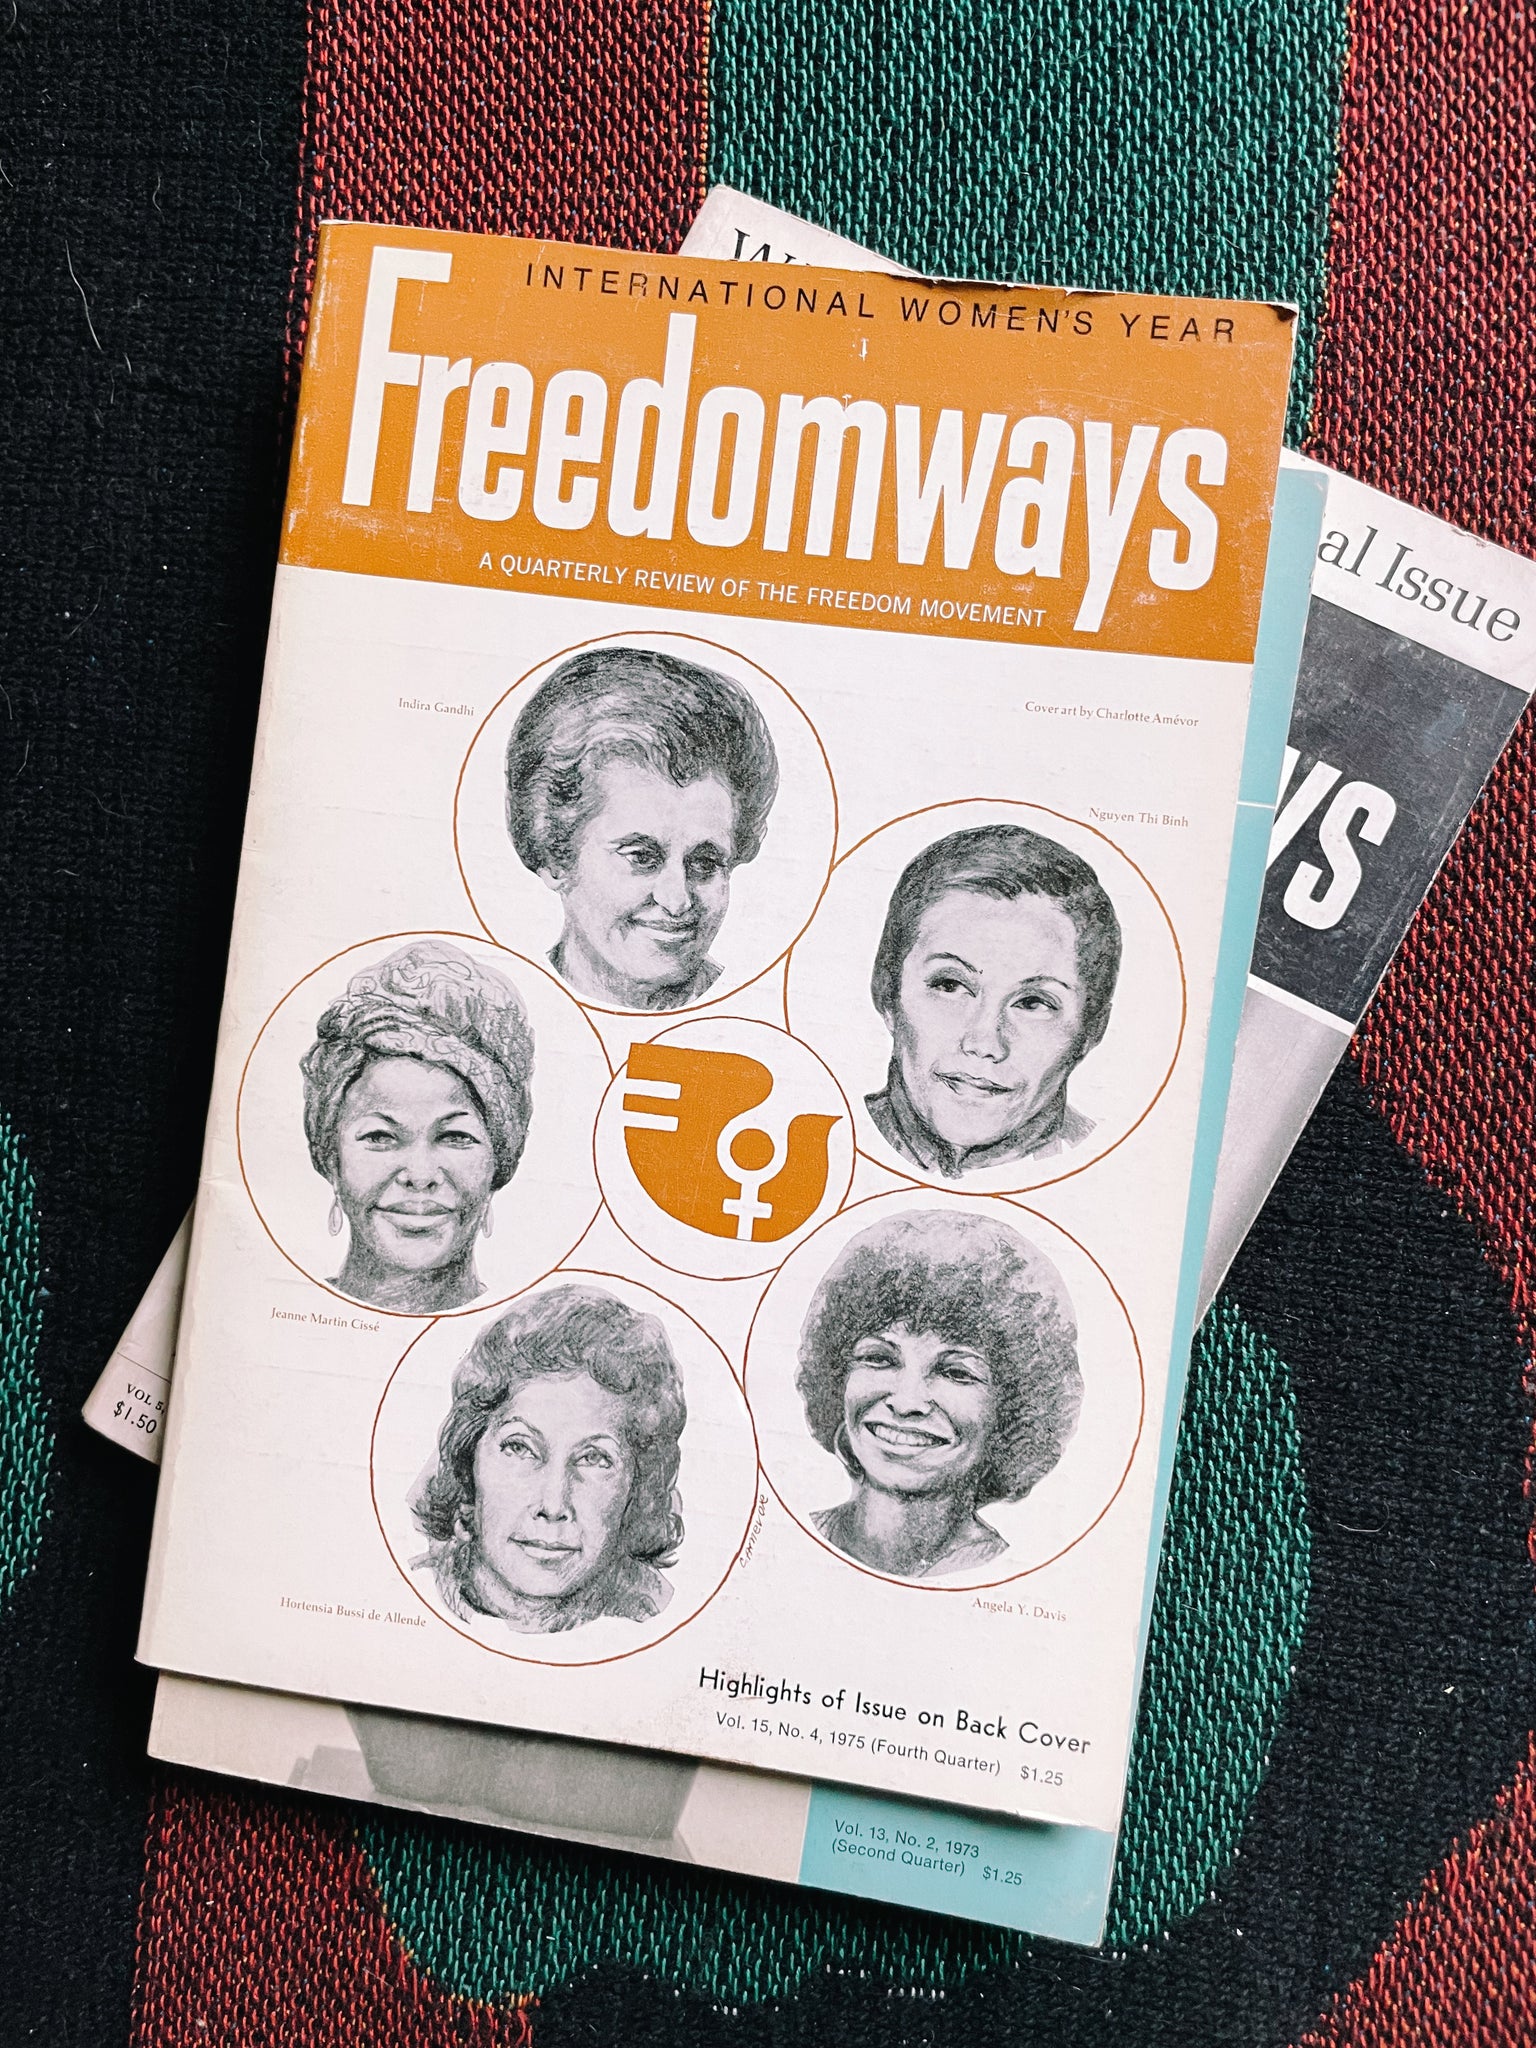 Vintage "Freedomways Journal" Issues (Please Select)